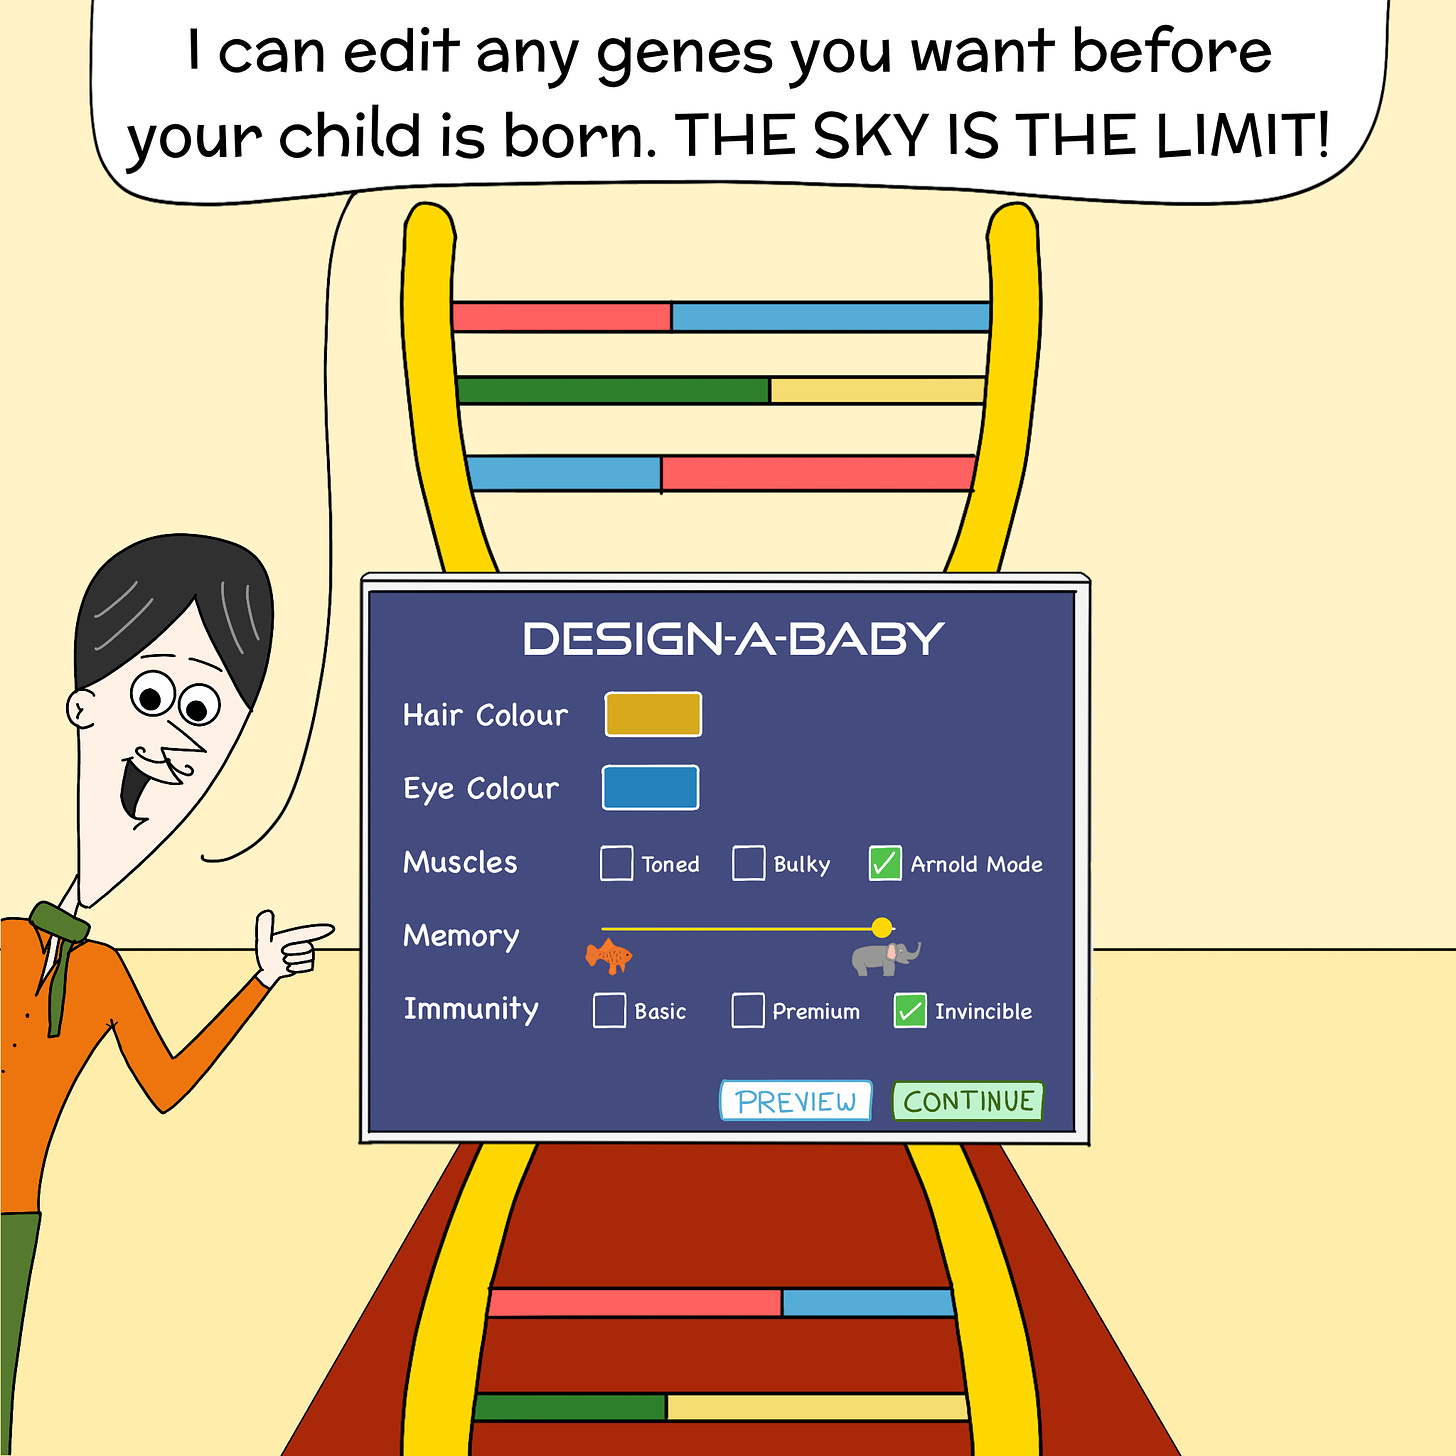 Panel 2: Now inside his store, Albert shows off his luxury gene editing tool in the shape of DNA. He says "I can edit any genes you want before your child is born. THE SKY IS THE LIMIT!". On the screen, he shows attributes that he can edit like hair colour, eye colour, muscles, memory, and immunity. 